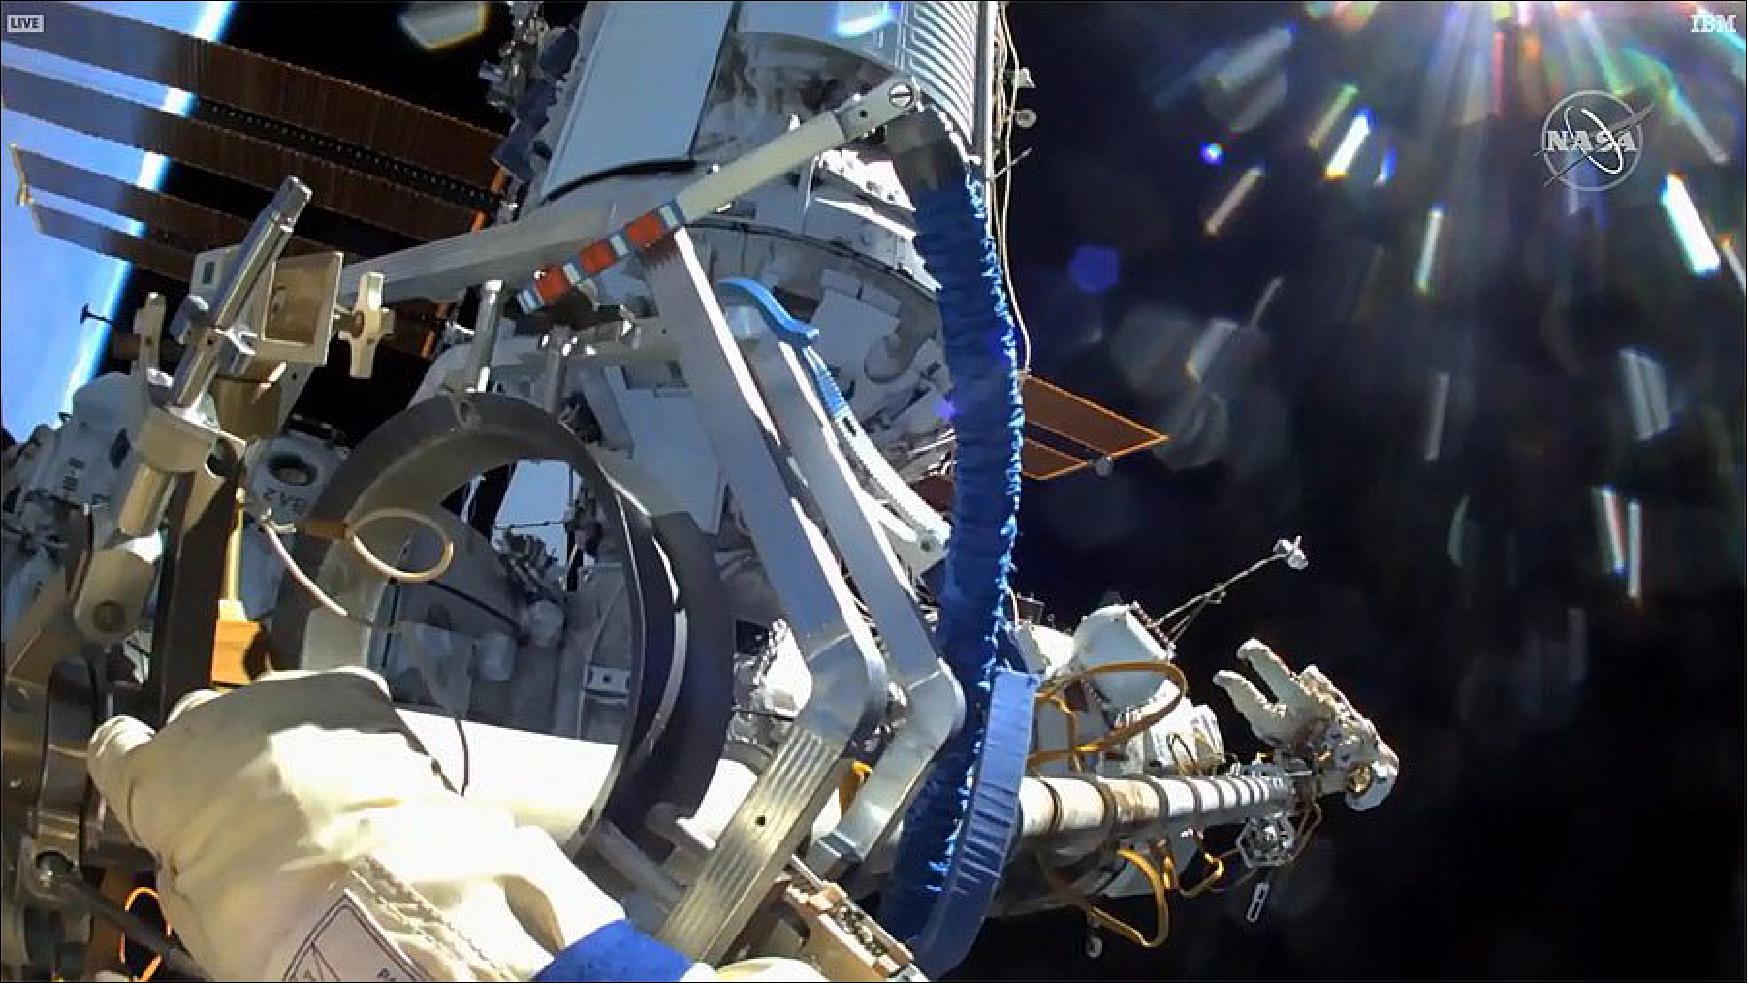 Figure 72: Pyotr Dubrov's helmet camera spots Oleg Novitskiy on the other end of the 46-foot-long (14 meters) Strela boom, a Russian crane, that the spacewalkers detached from the Pirs airlock (image credit: NASA)